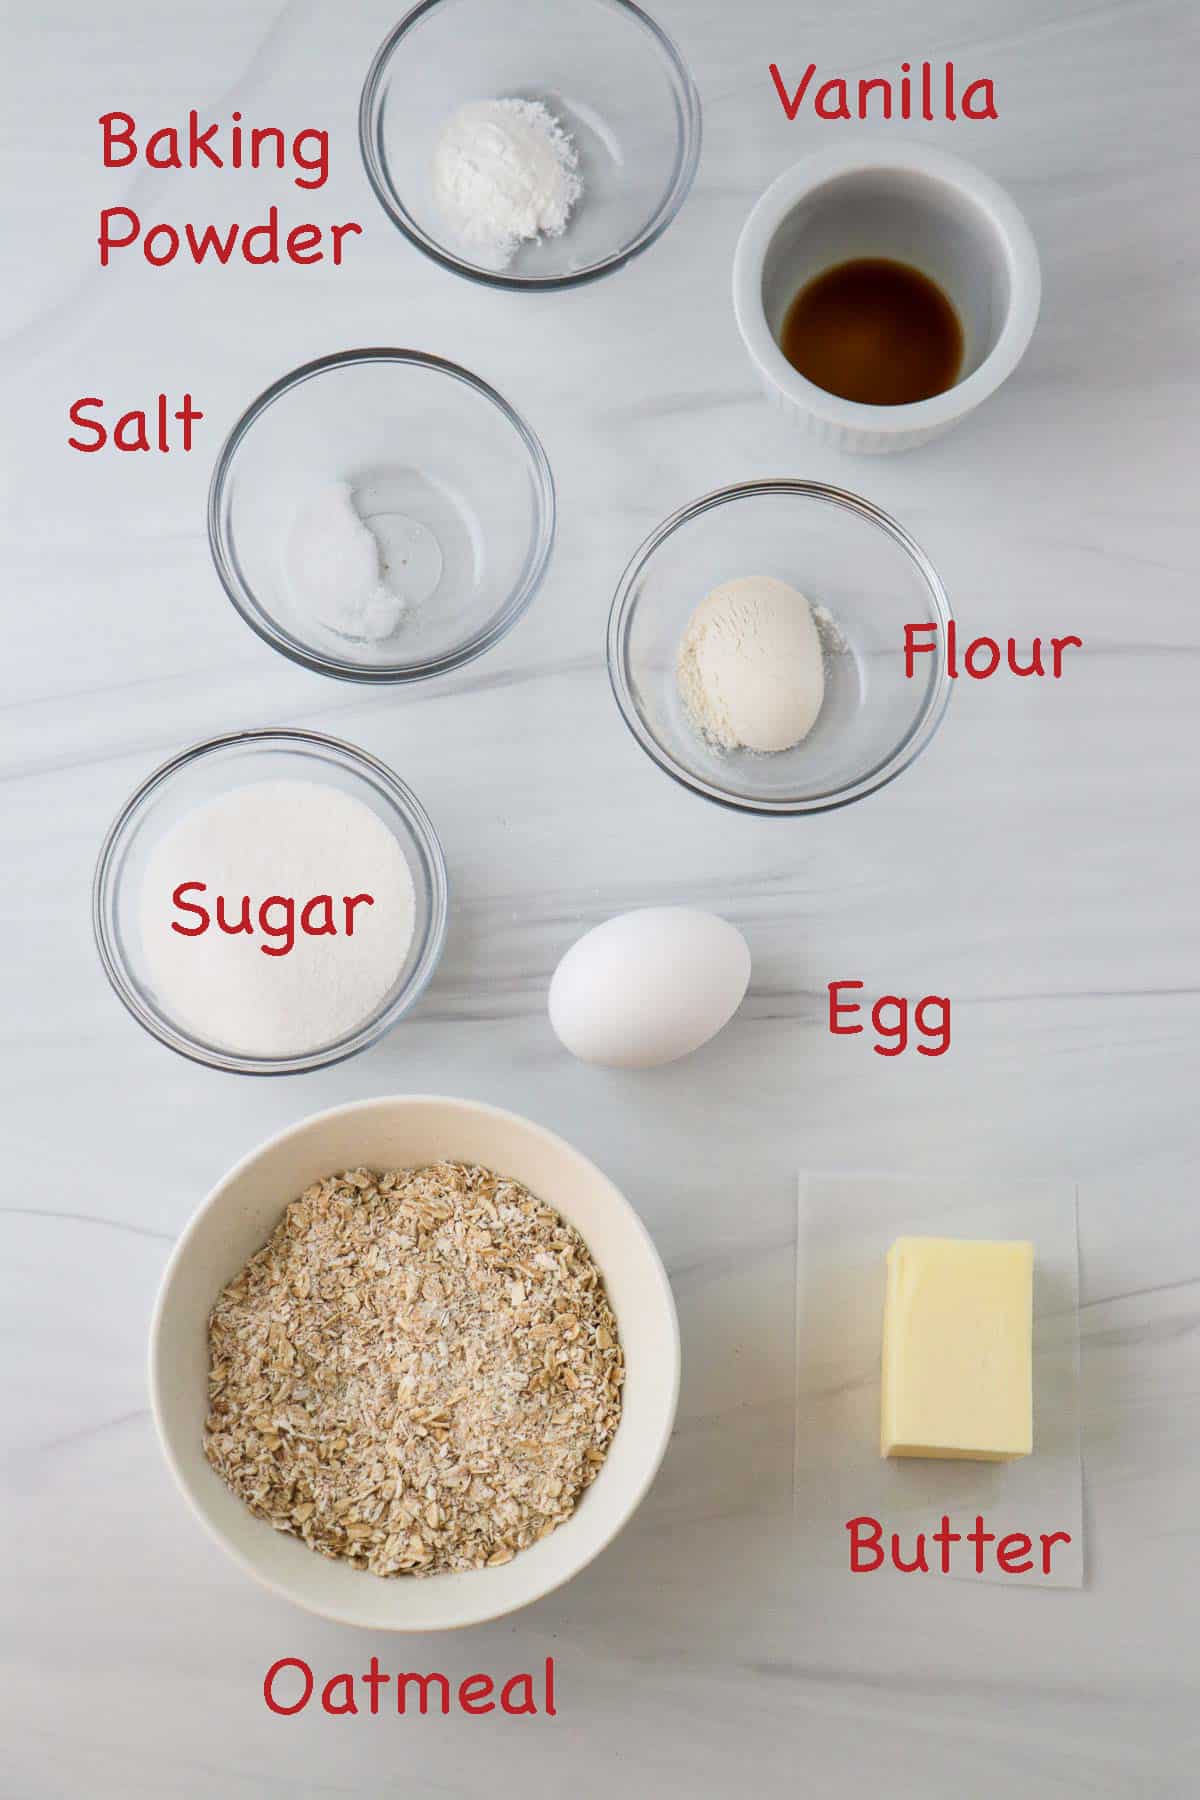 Labeled ingredients for Swedish Oatmeal Cookies (Havreflarn).